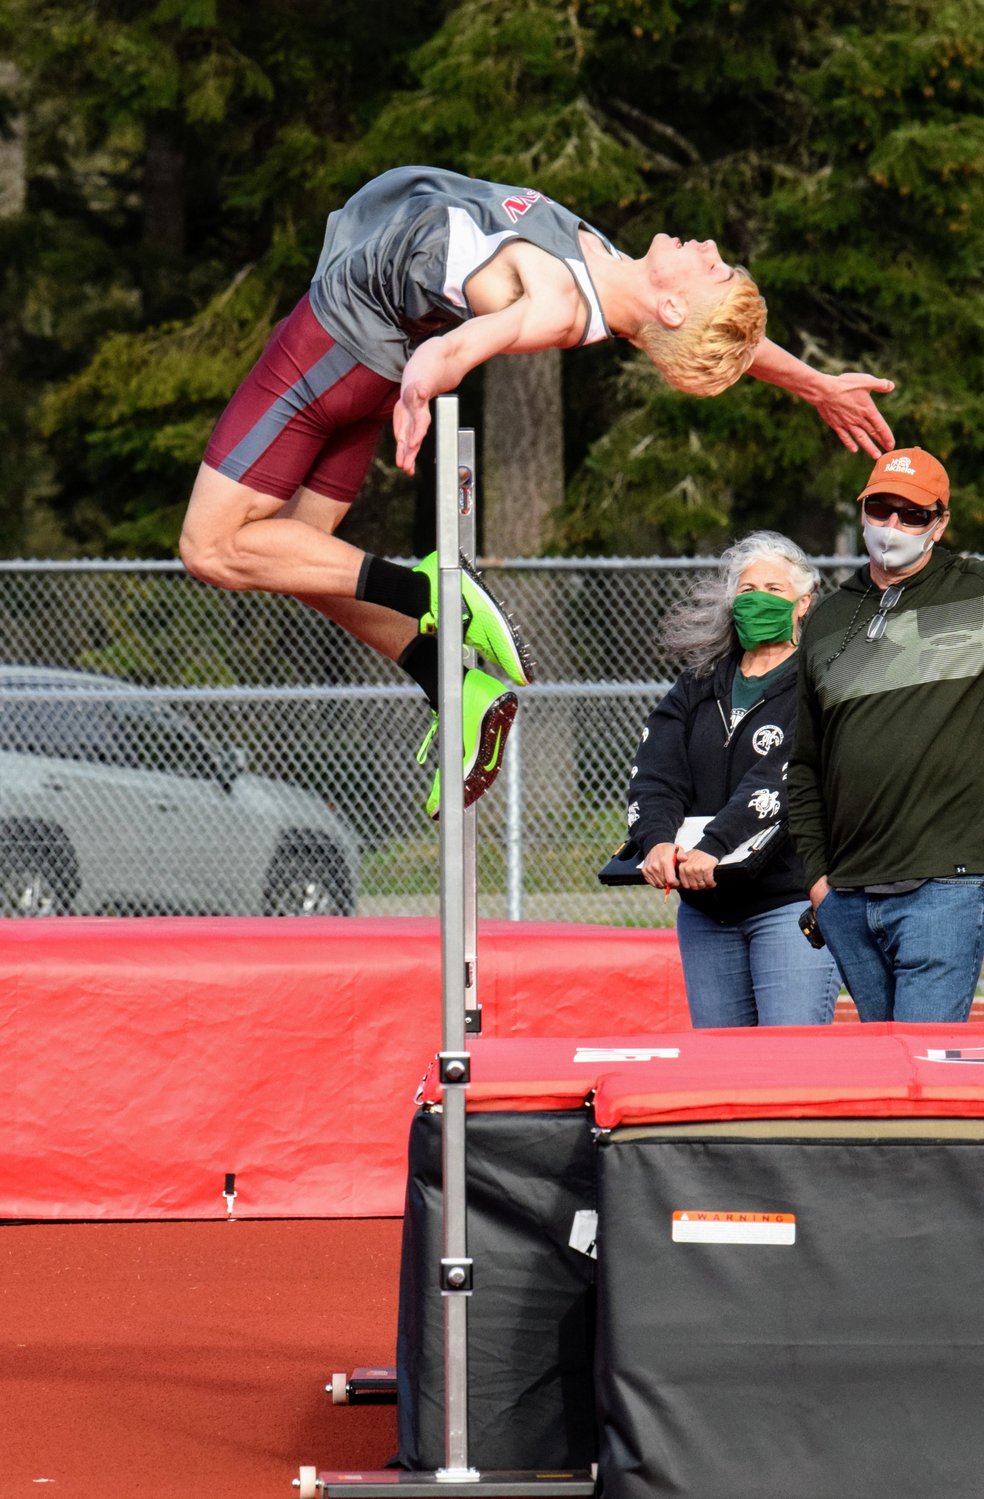 W.F. West's Seth Hoff was named the Male Athlete of the Meet at the Shelton Invite after winning one event and taking second place in three others.